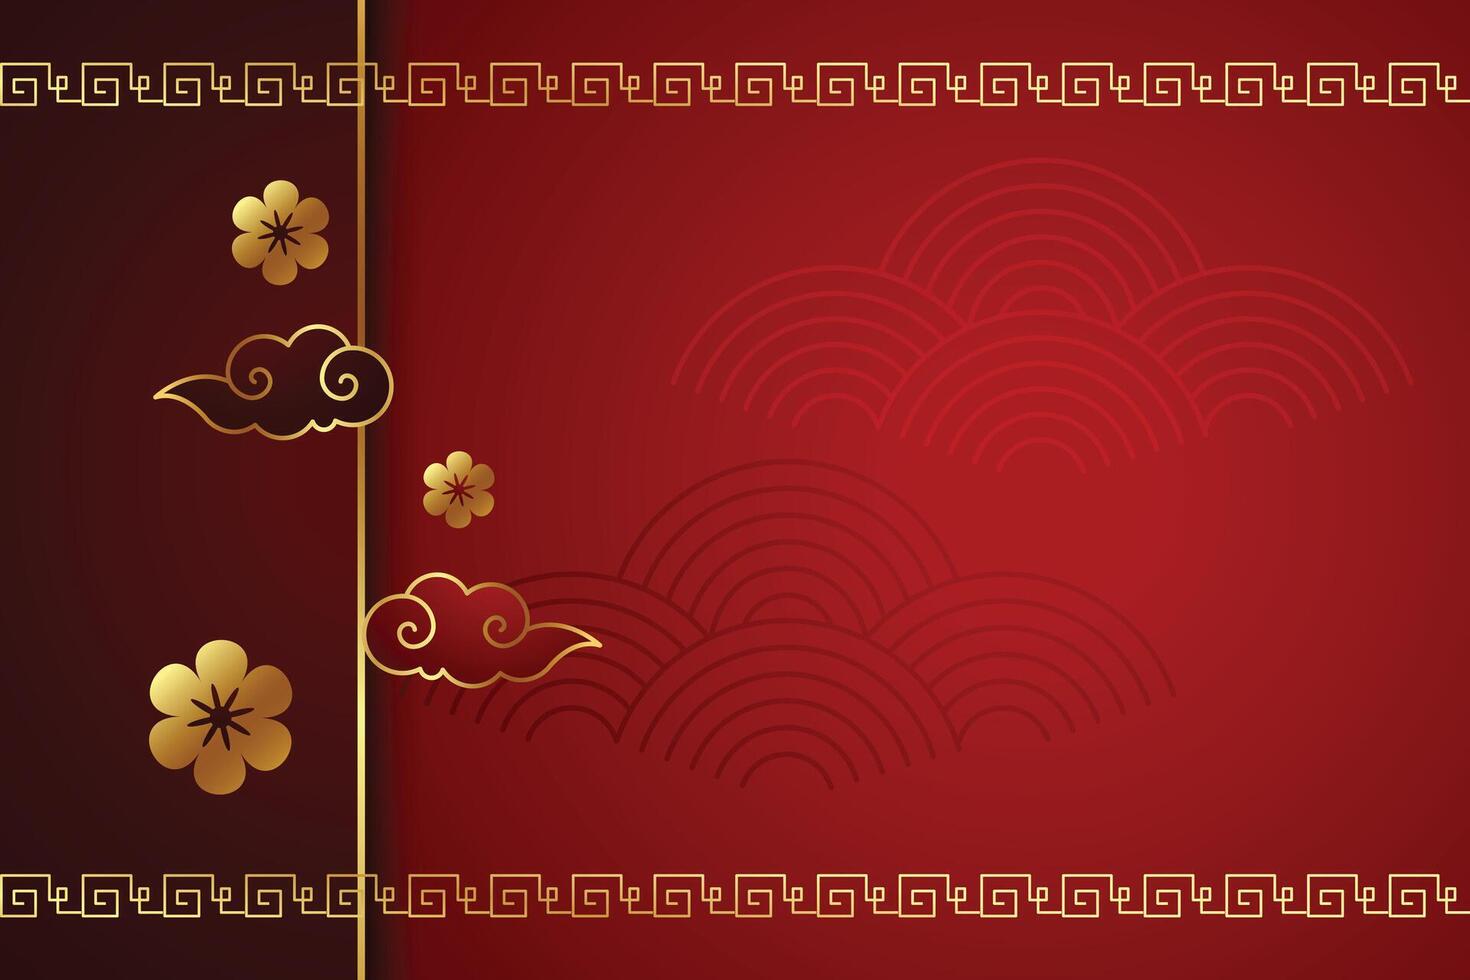 decoratief Chinese patroon rood achtergrond vector